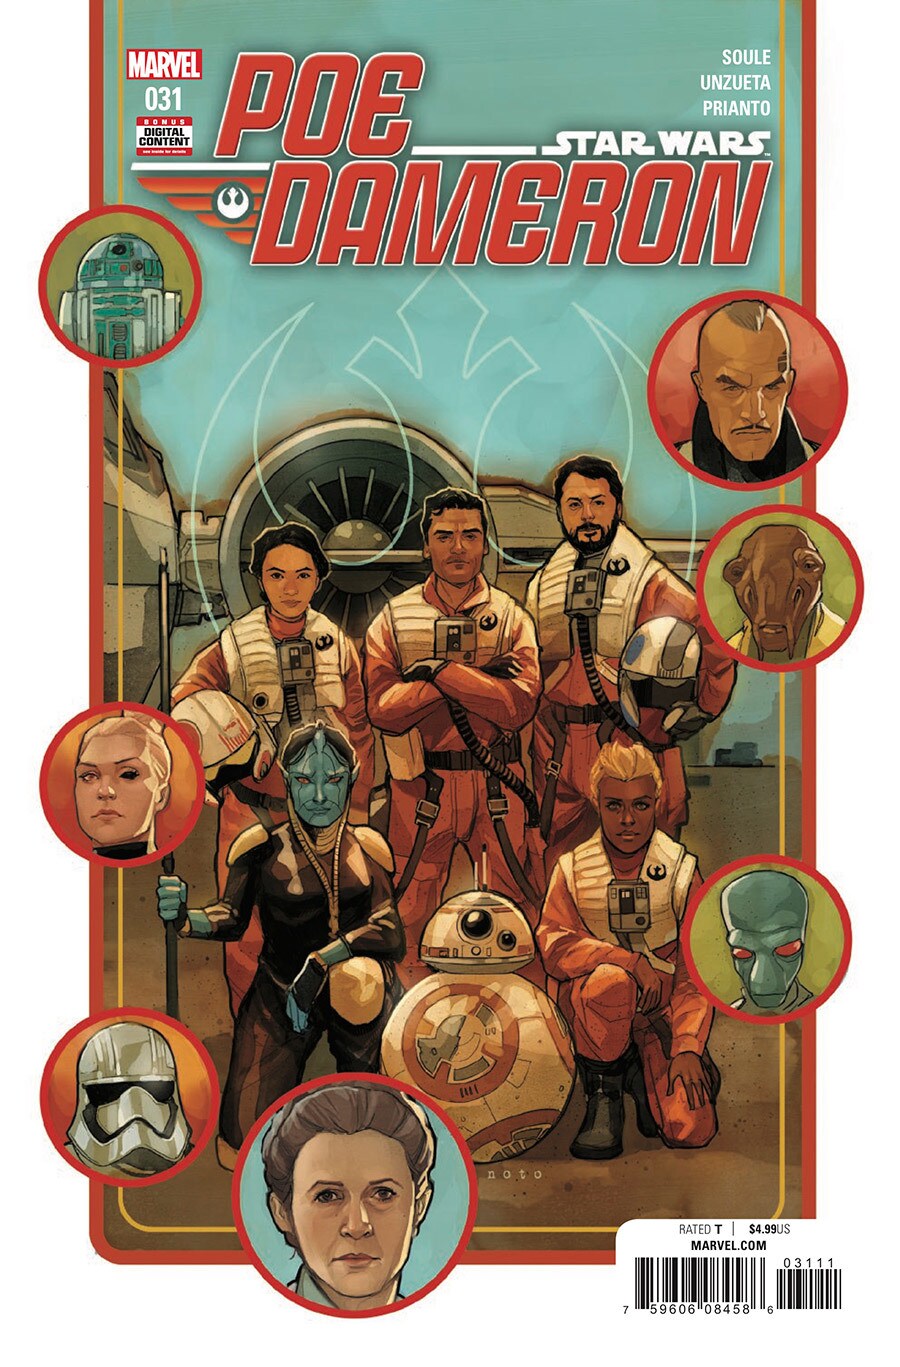 The cover of Poe Dameron #31.